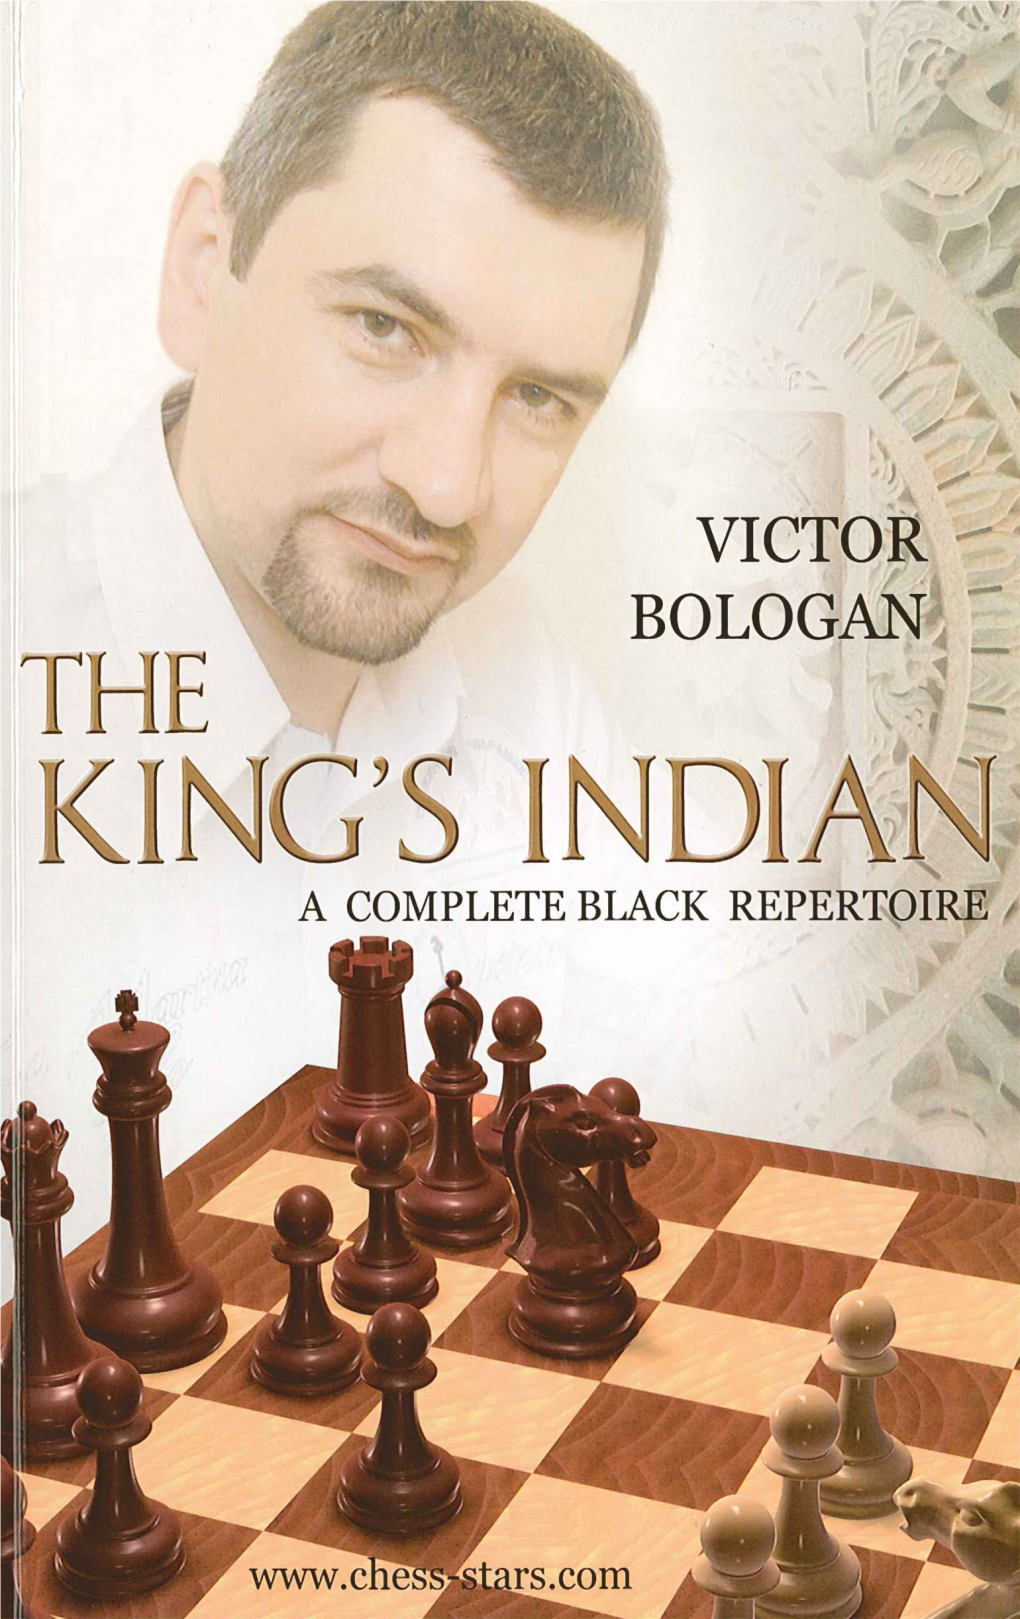 Bologan-Victor-The-Kings-Indian-2009